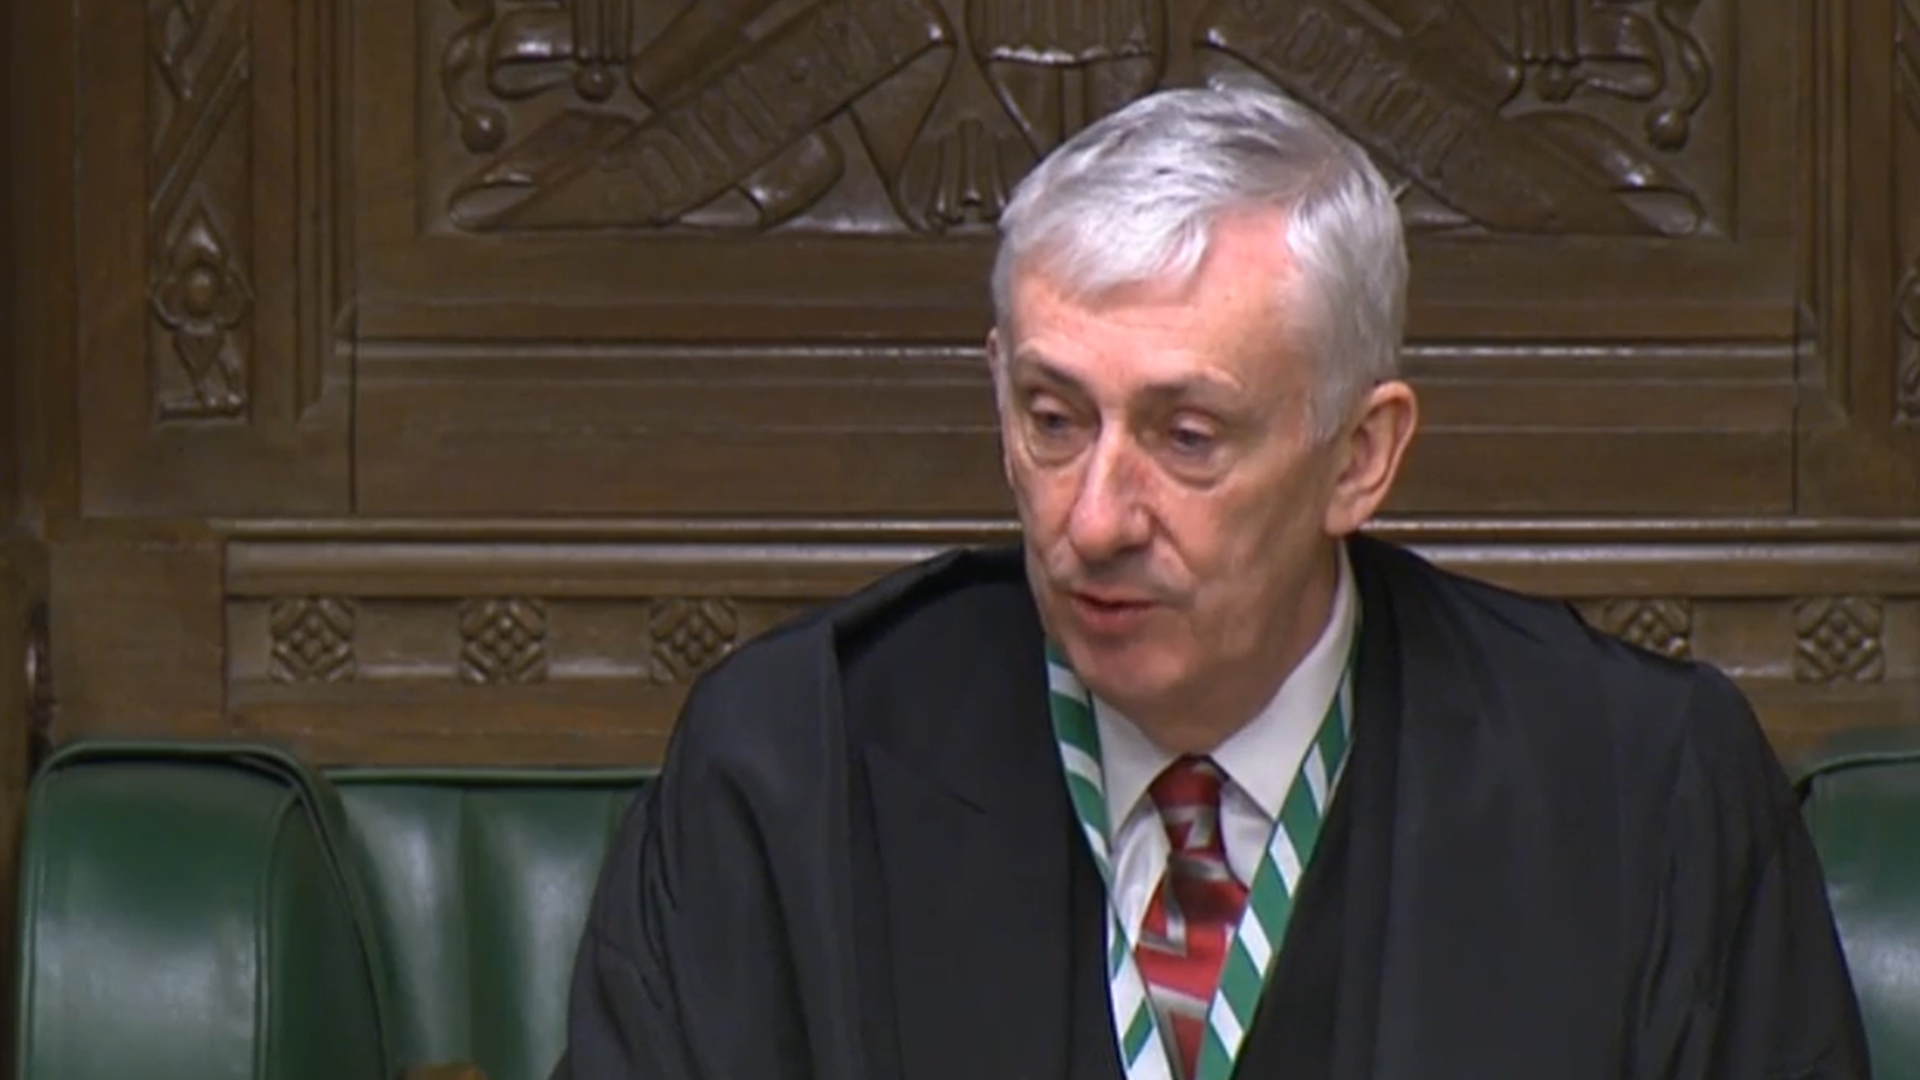 Sir Lindsay Hoyle in the House of Commons - Credit: Parliament Live